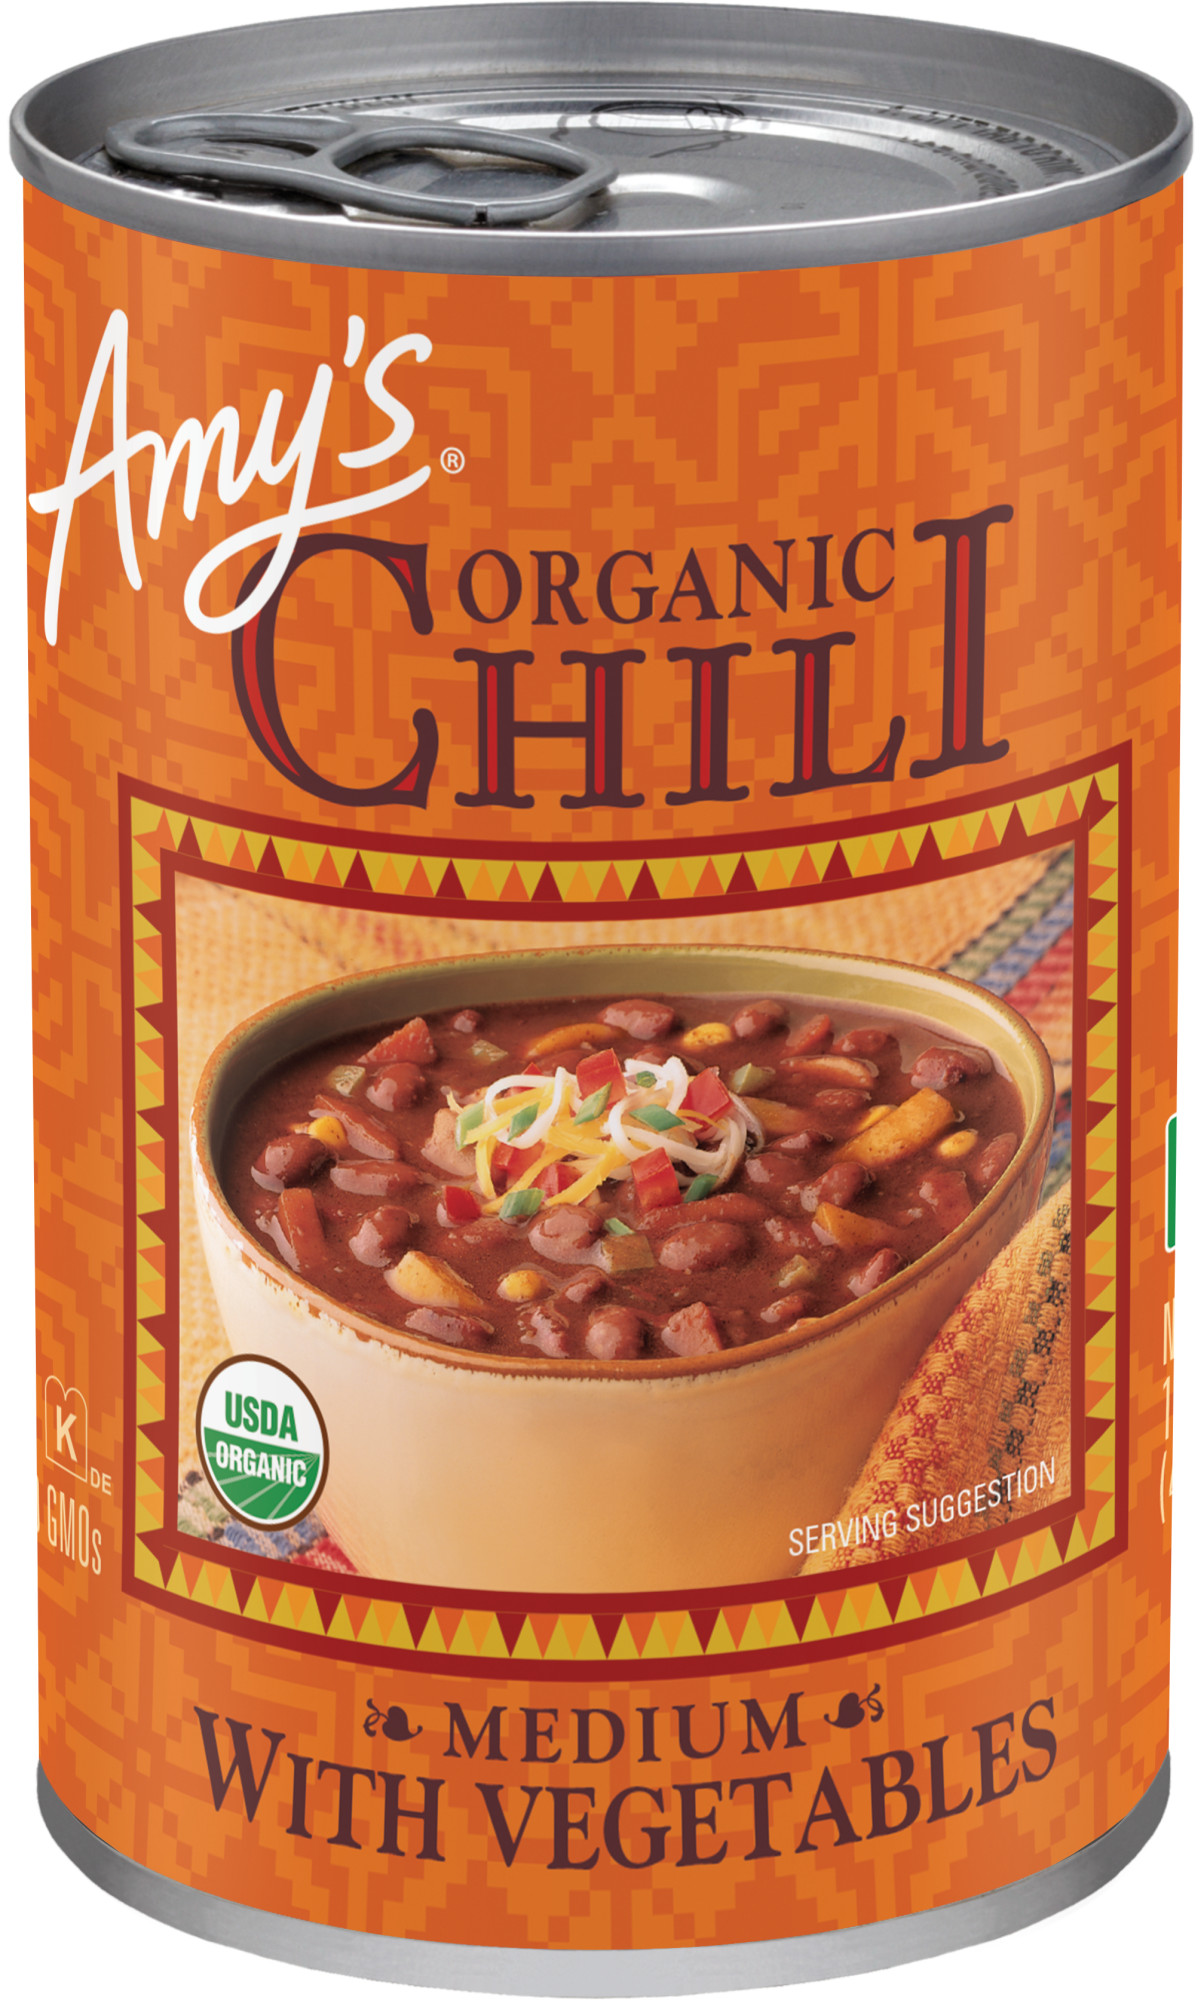 Amy’s Kitchen Organic Medium Chili with Tofu and Vegetables, Gluten Free, Canned Chili, 14.7 oz - image 1 of 9